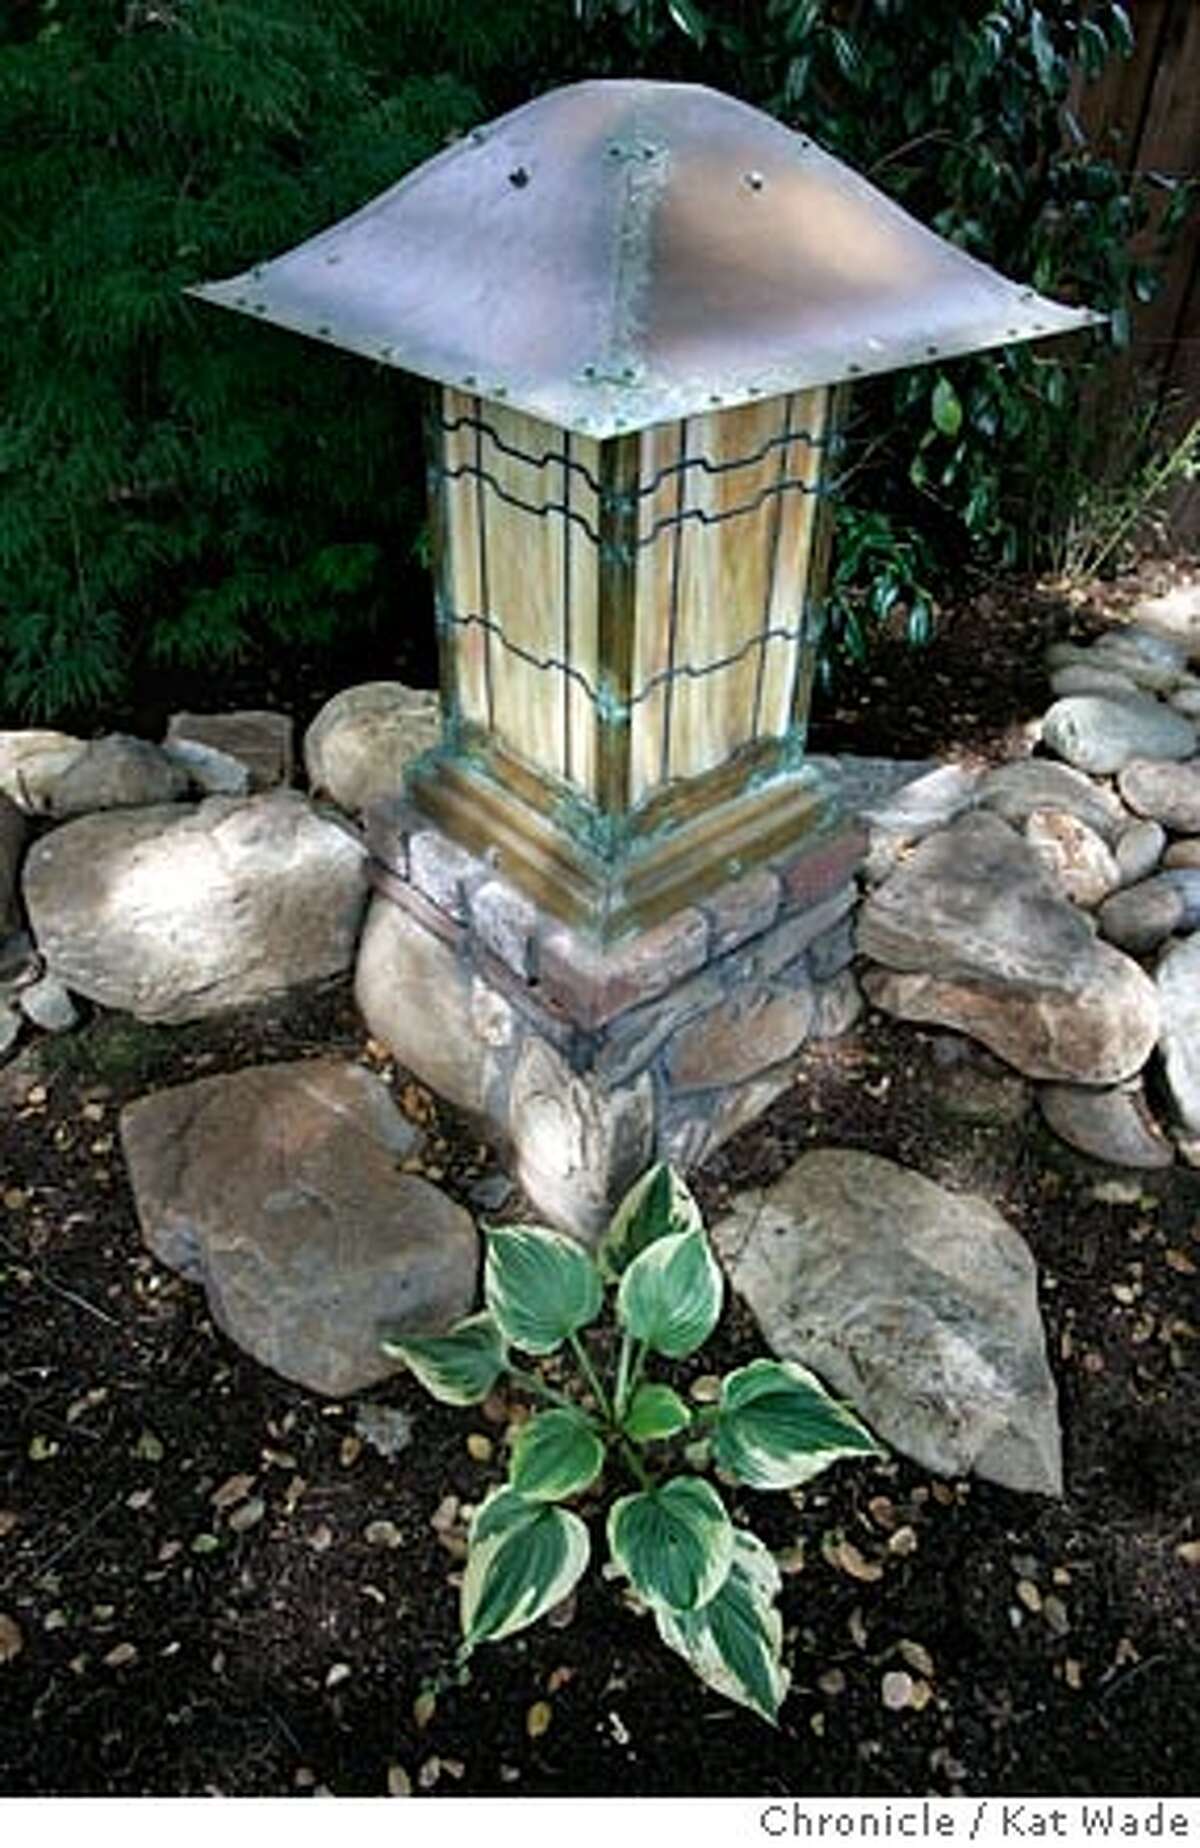 On 4/26/05 in Los Altos Debbie Segers recently designed garden including the subdued lighting of a stained glass and copper latern, a replica of a fixture at the Gamble House in pasadena, was designed to complement the craftsmen-style architecture of the bungalow home. Kat Wade/ The Chronicle